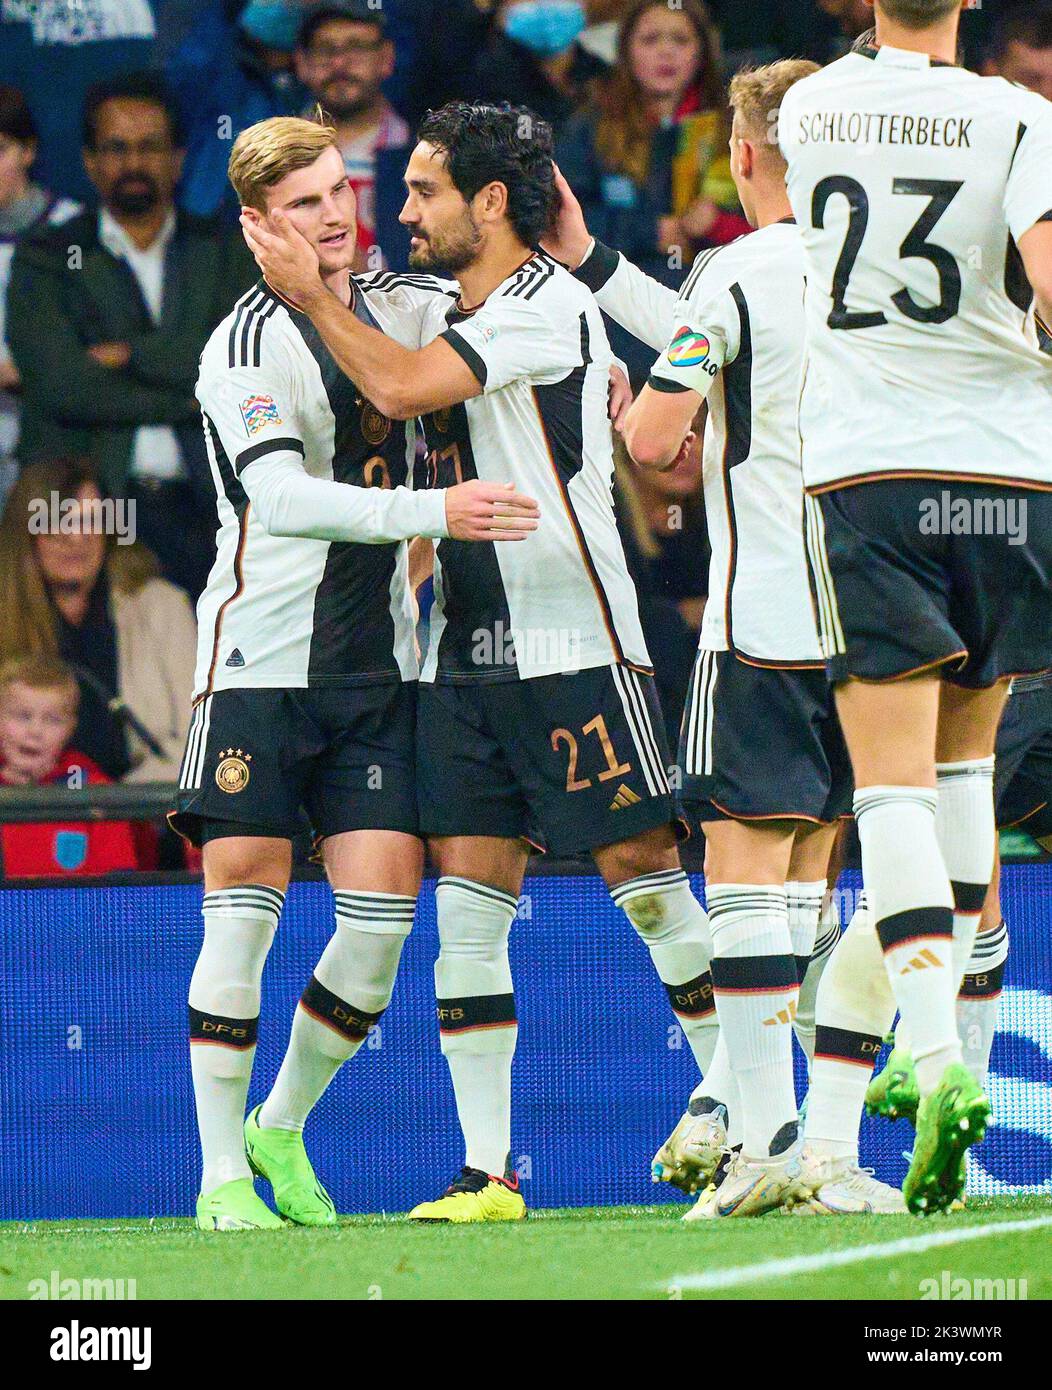 Ilkay Gündogan, DFB 21   scores, shoots goal , Tor, Treffer, Torschuss, 0-1, celebrates his goal, happy, laugh, celebration, Timo Werner, DFB 9   in the UEFA Nations League 2022 match  ENGLAND - GERMANY 3-3  in Season 2022/2023 on Sept 26, 2022  in London, Great Britain.  © Peter Schatz / Alamy Live News Stock Photo